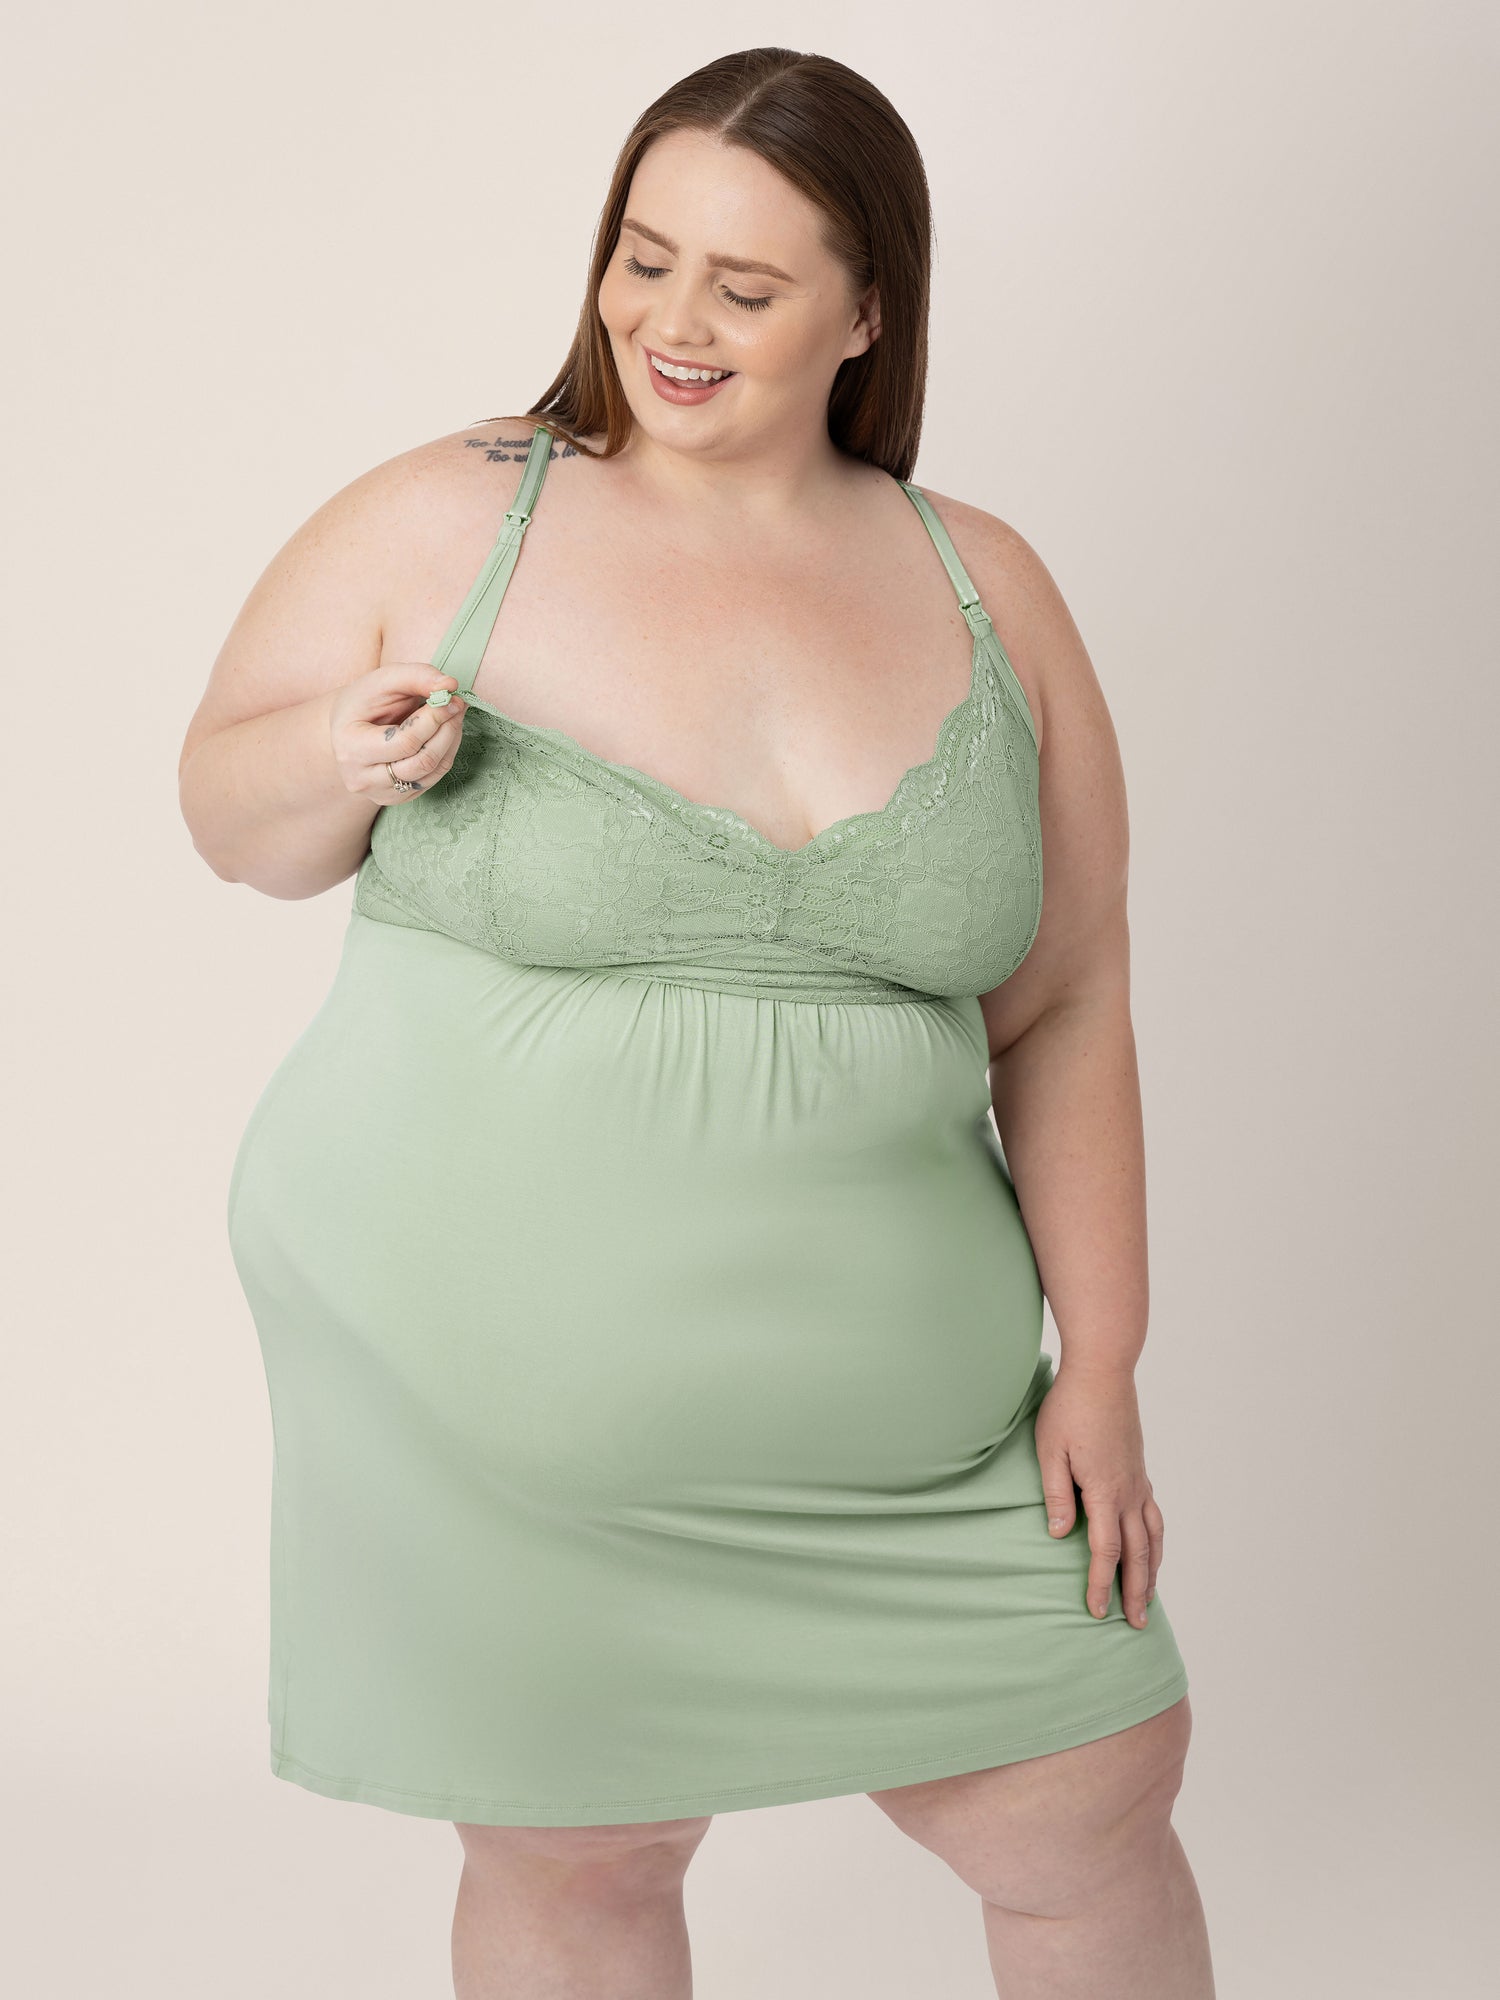 Model wearing the Lucille Maternity and Nursing Nightgown in Pistachio showing the easy clip down nursing access.